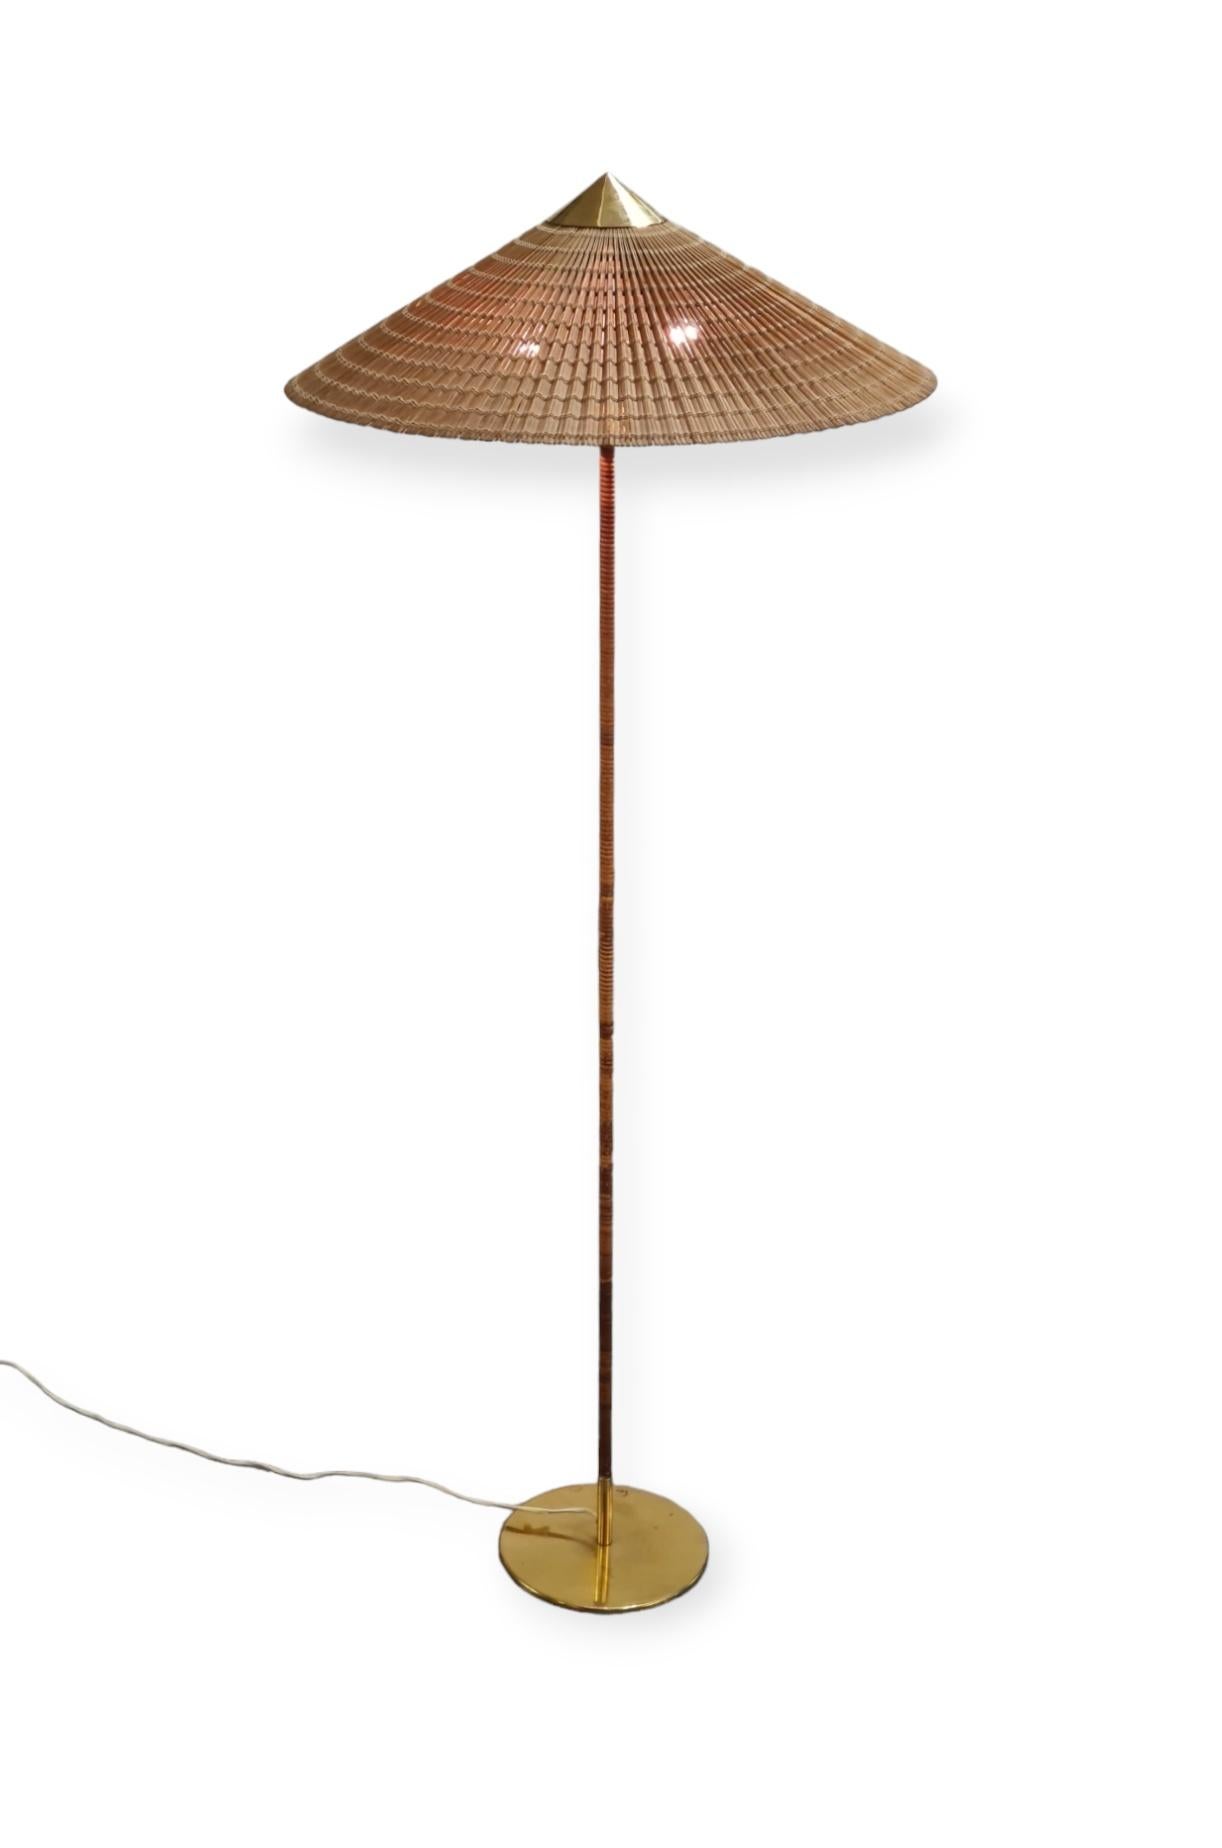 This iconic floor lamp was originally designed by Paavo Tynell in the late 1930s and has been refined during the golden era of the Tynell design in the second half of the 1940s. This exquisite lamp still retains all of the original parts except for